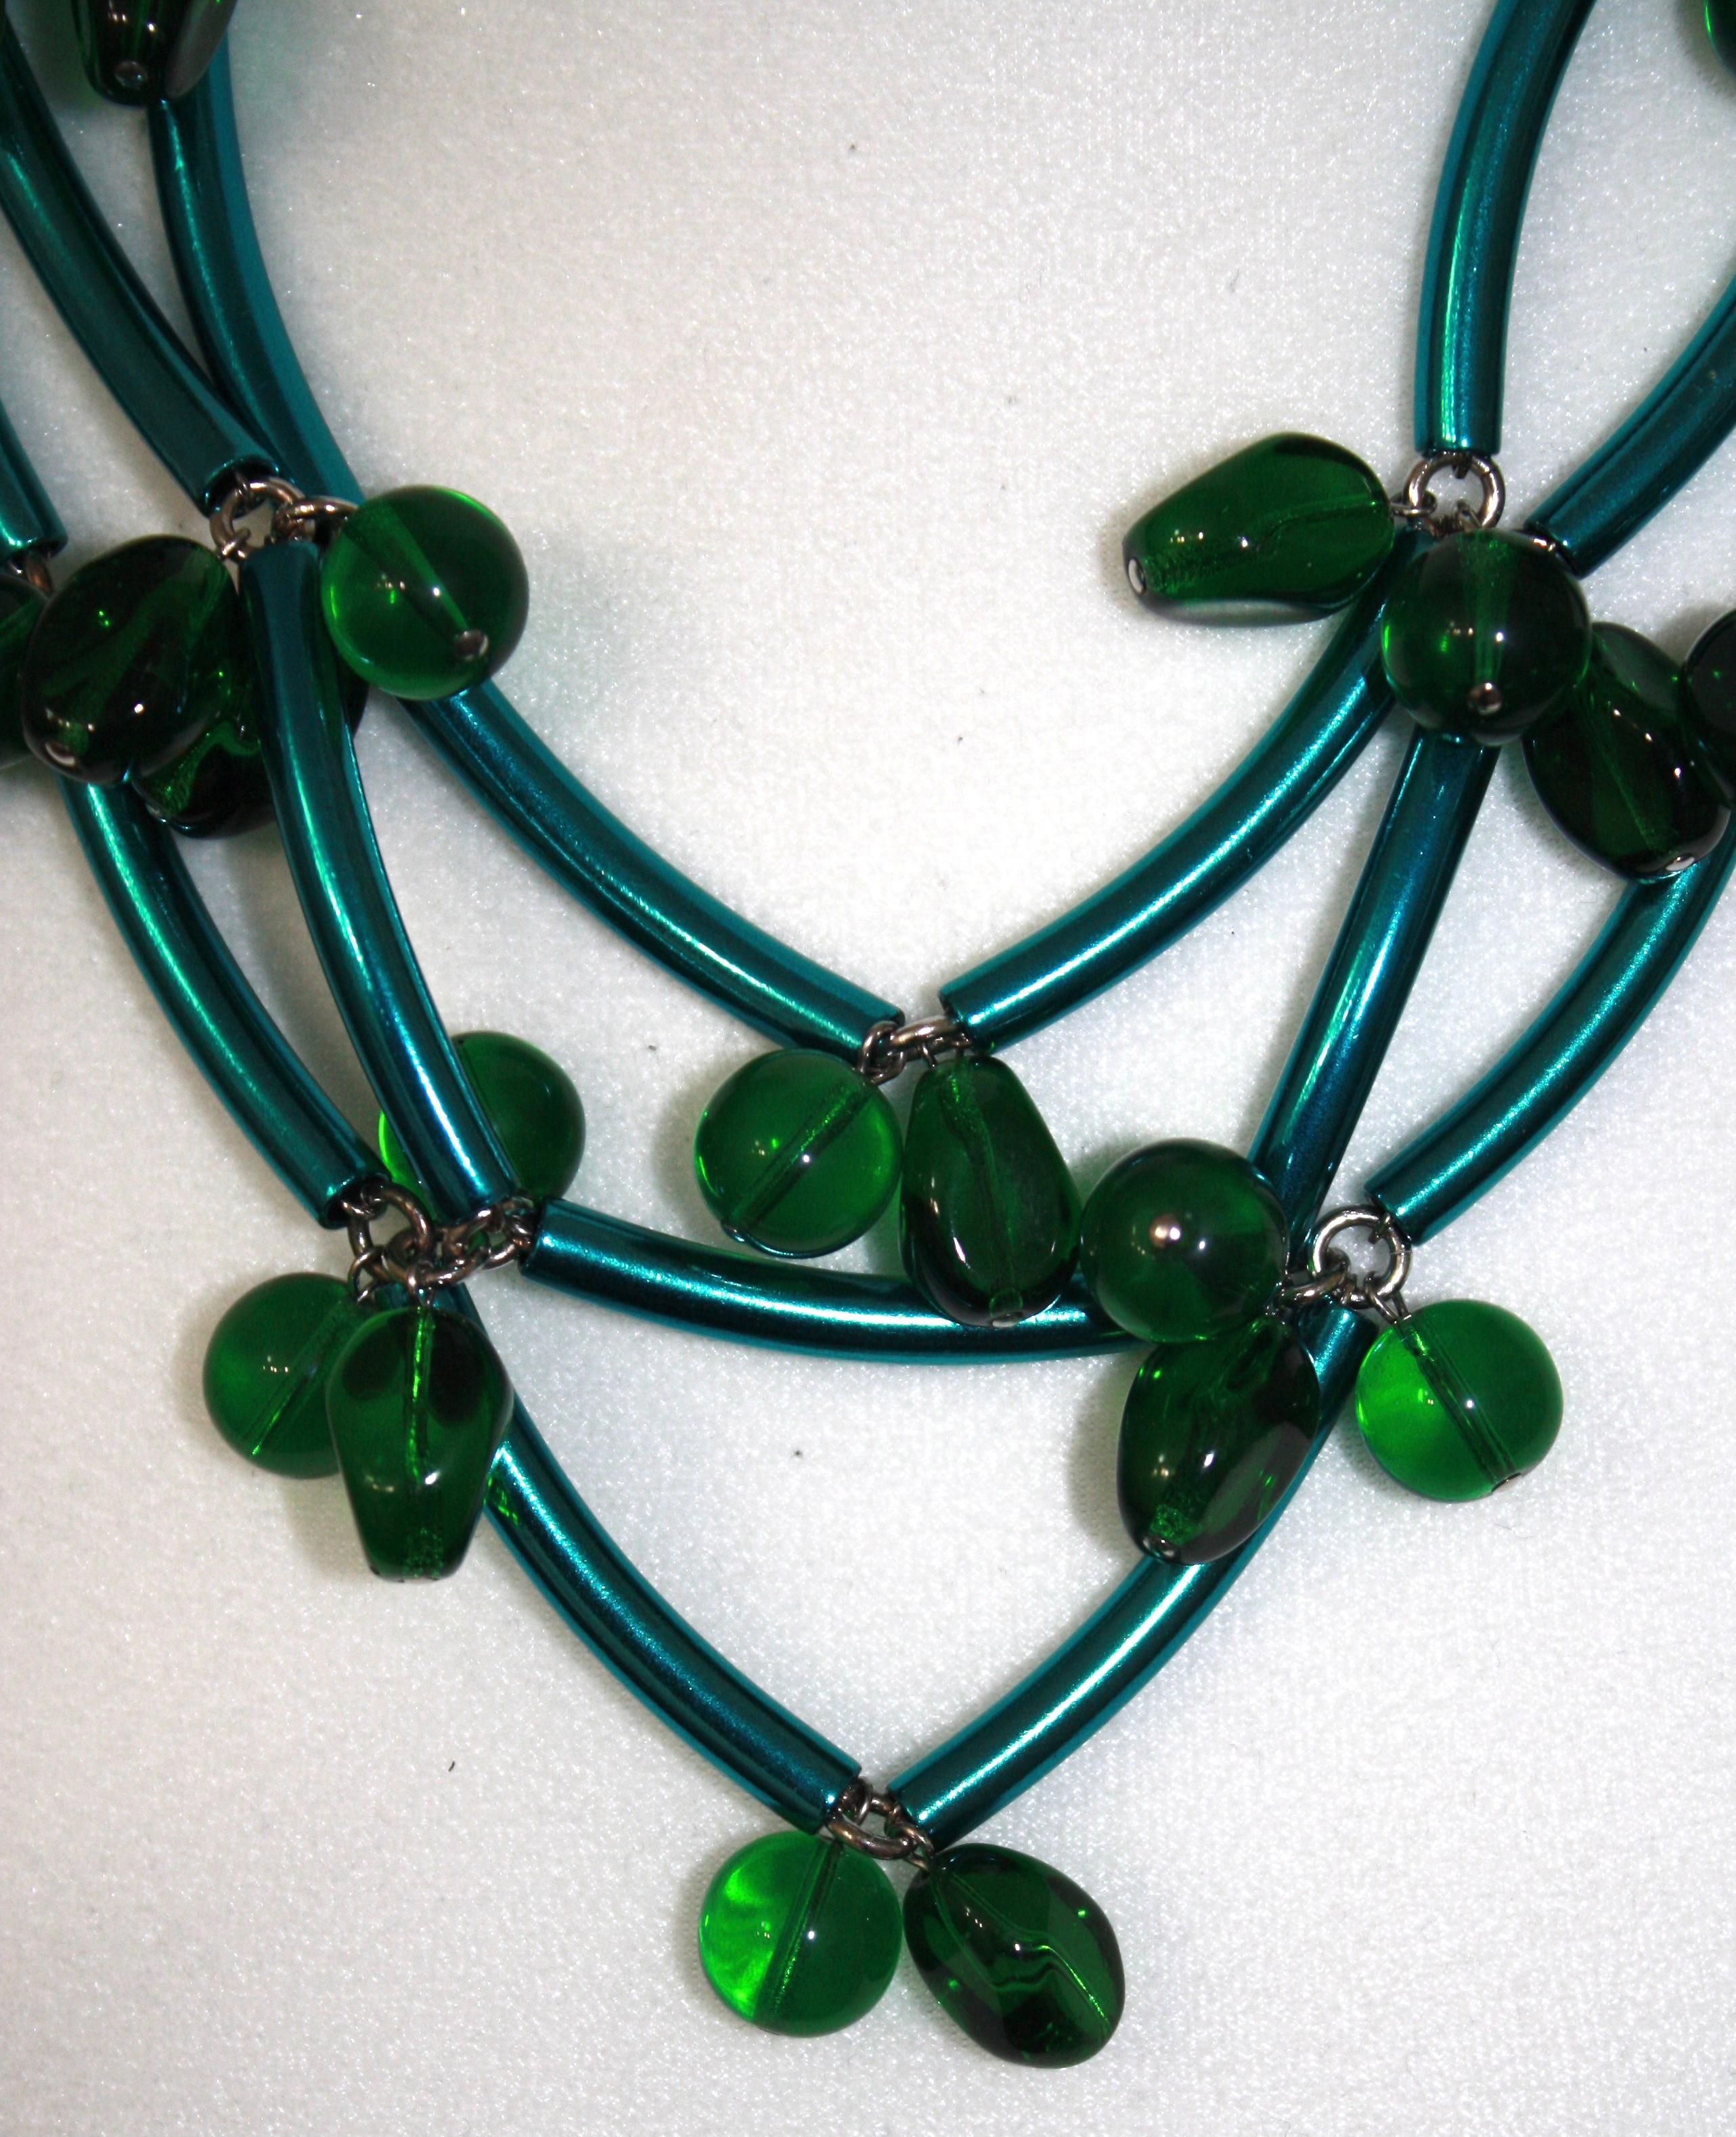 Emerald color tubes , handmade glass beads. Iconic design, made in Paris